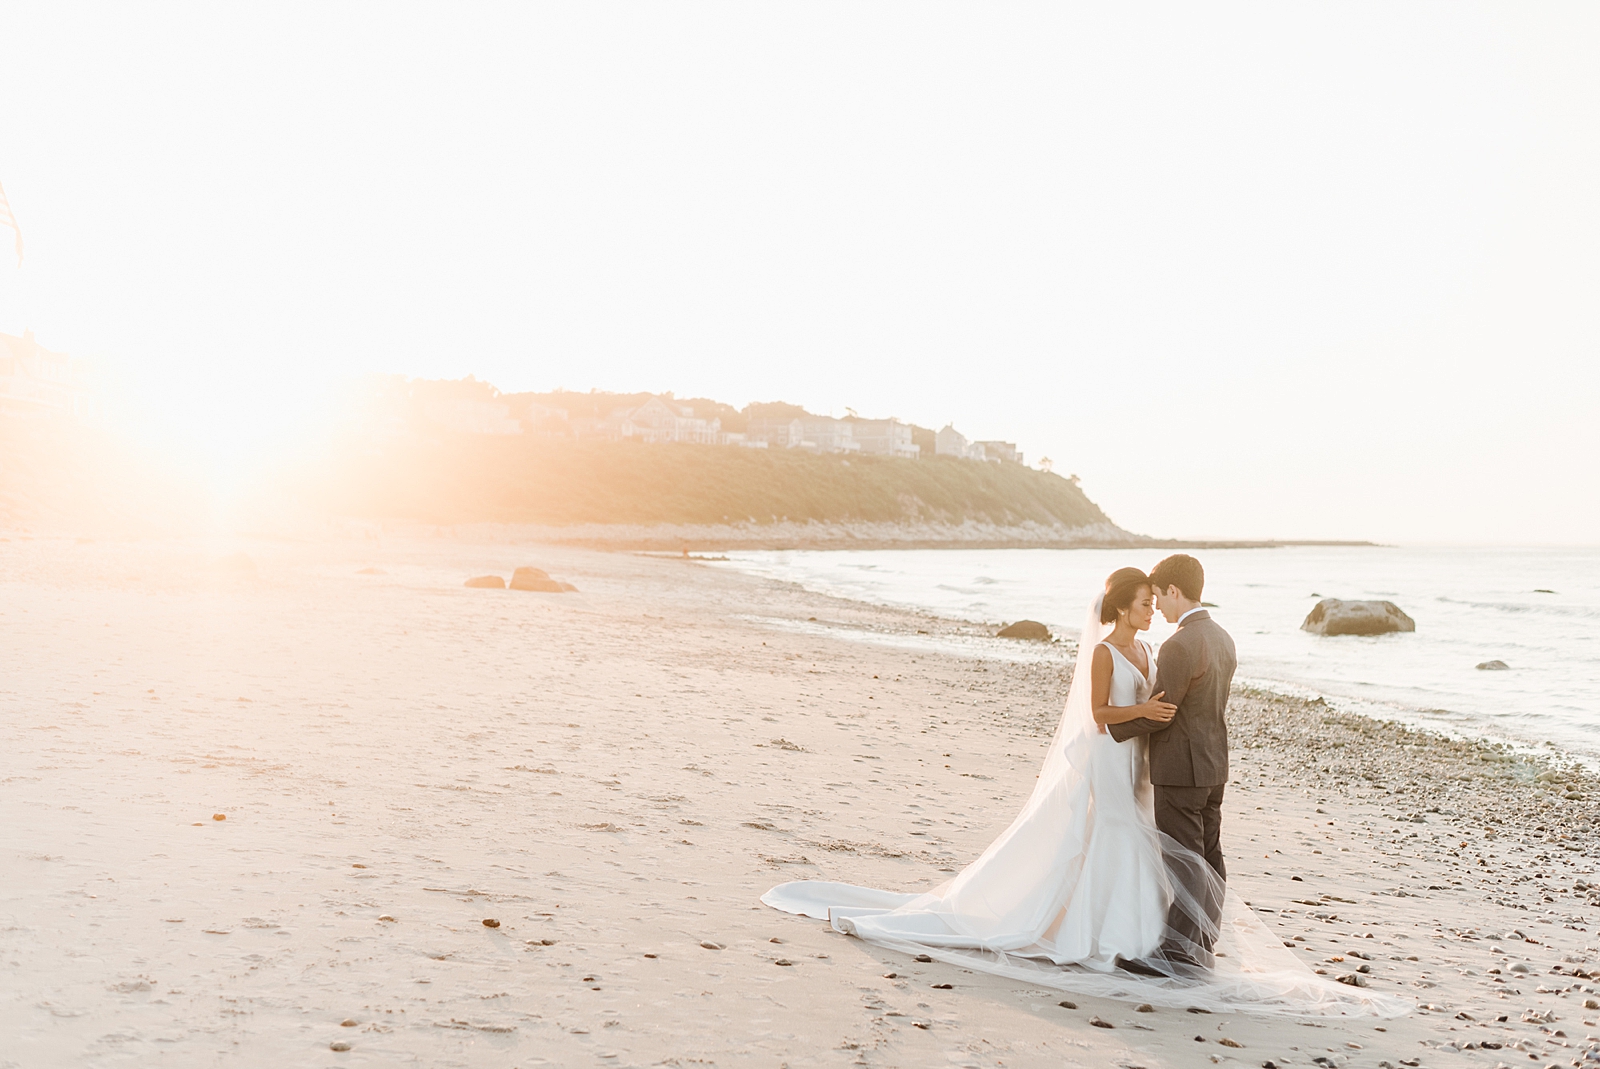 Cape Cod Micro Wedding on 4th of July in Plymouth, Massachusetts by Boston Wedding Photographer Annmarie Swift